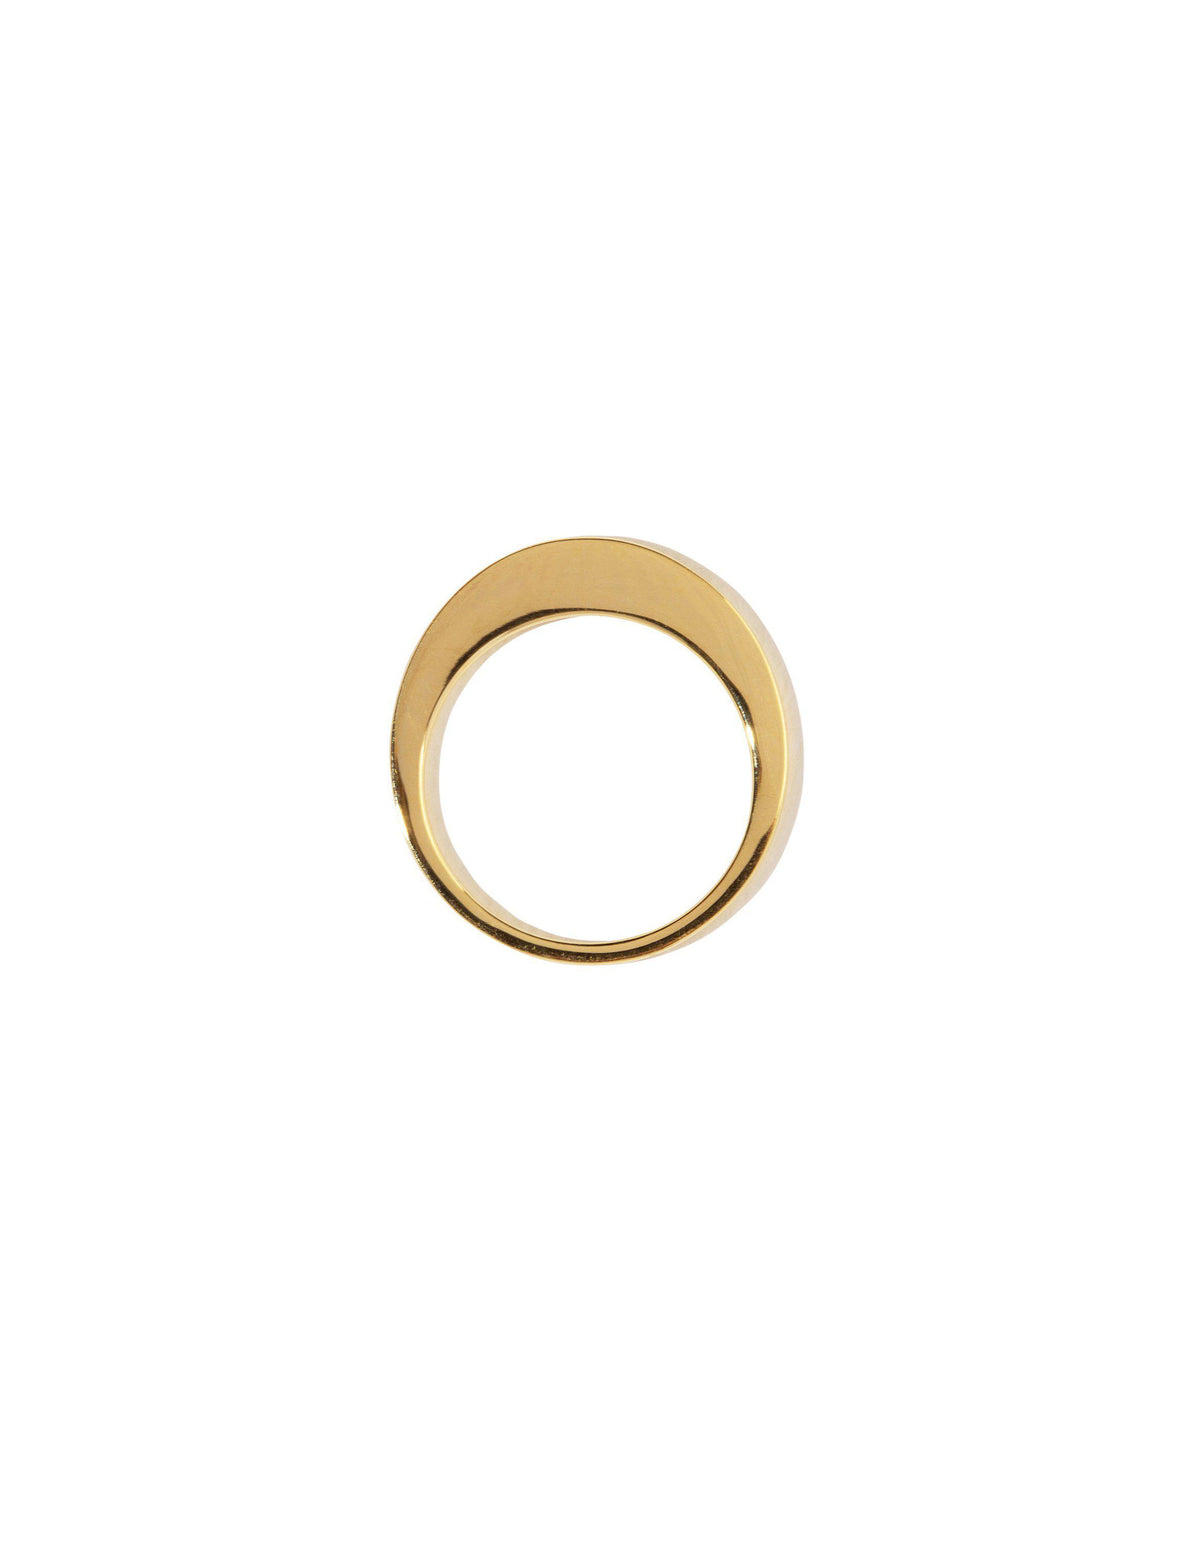 Ozone ring Solid gold - Overload Studios